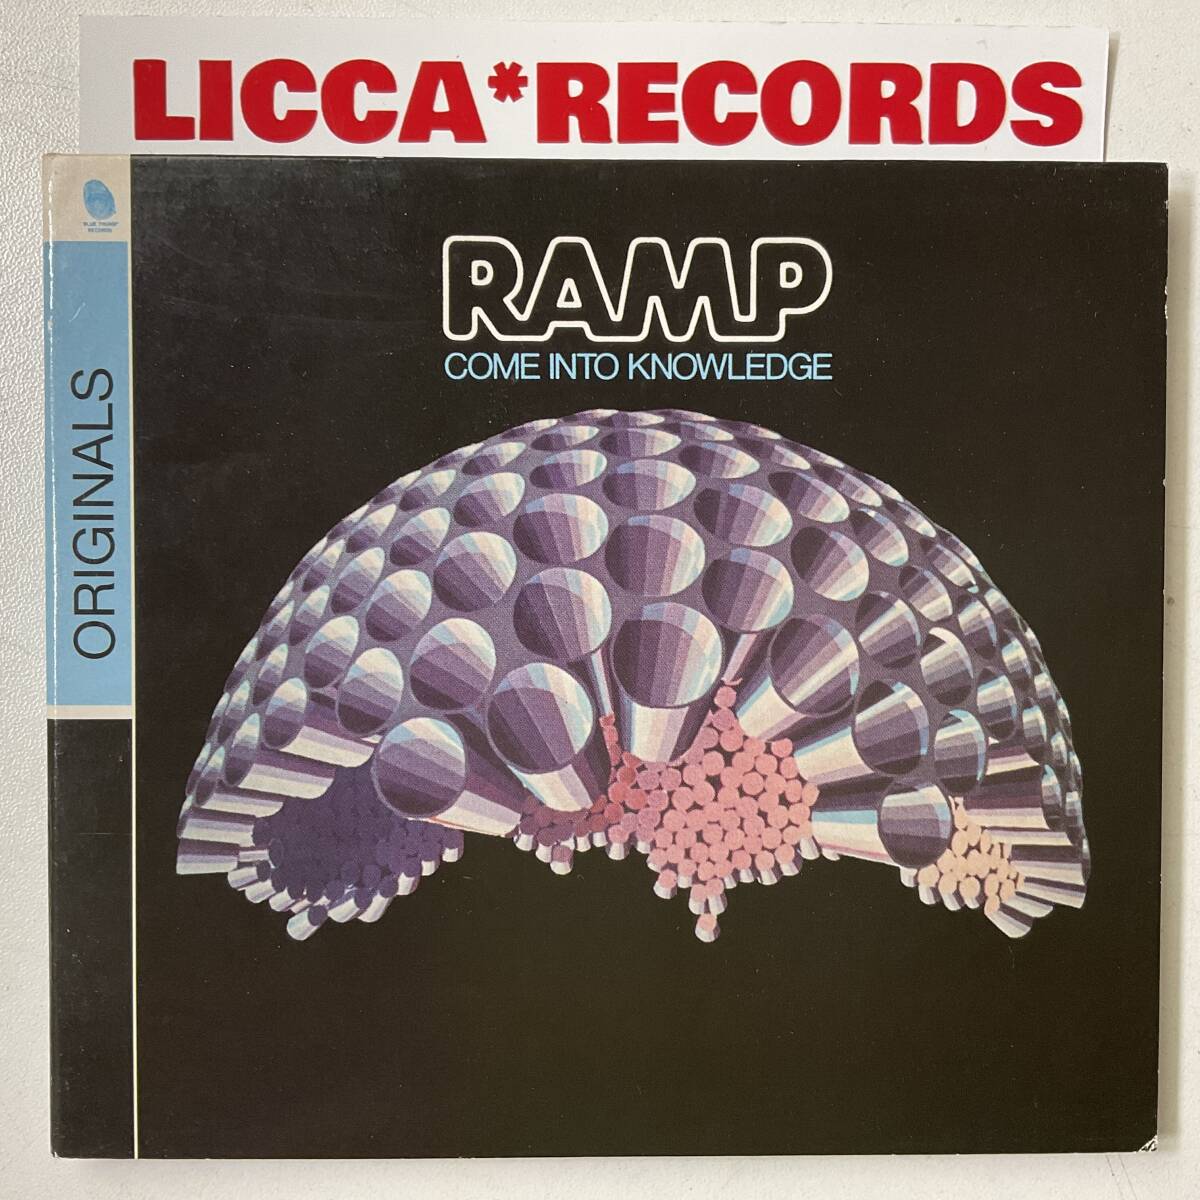 REMASTERED Ramp Come Into Knowledge CD LICCA*RECORDS 476_画像1